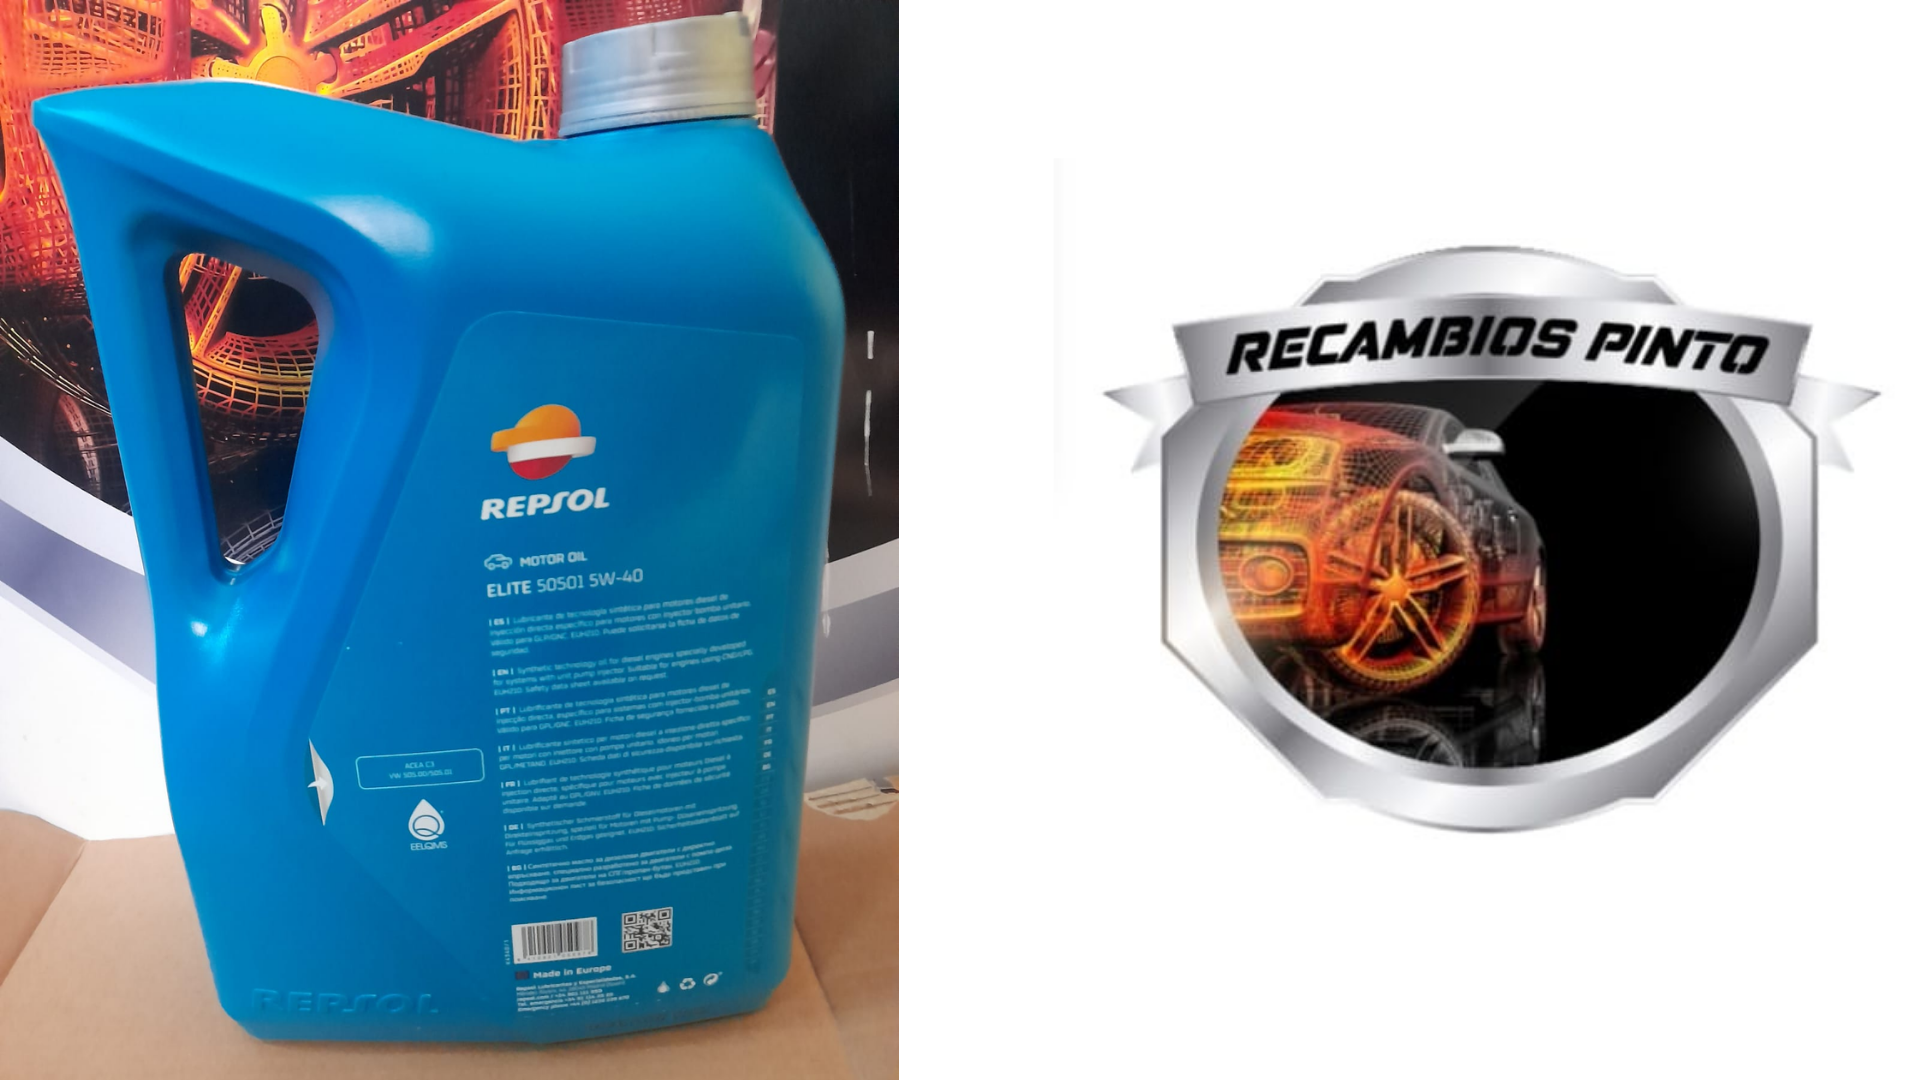 https://recambiospinto.es/wp-content/uploads/2022/01/aceite-5w40-1.png